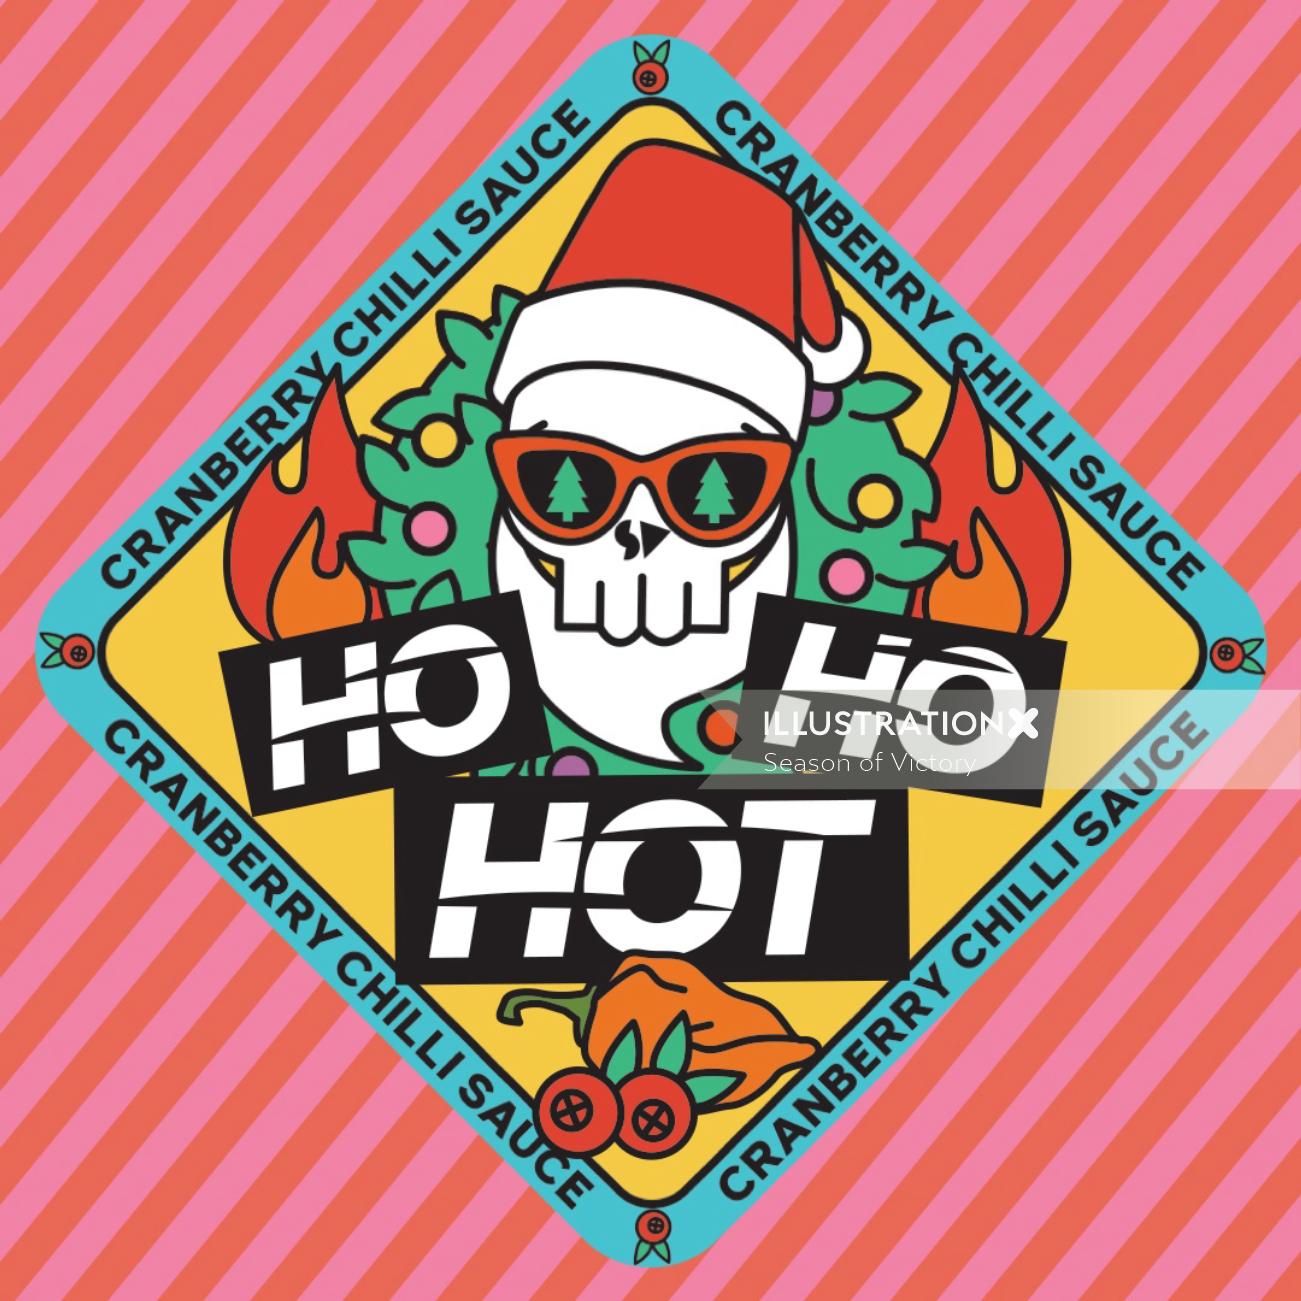 Animated gifs label for “Ho Ho Hot” hot sauce